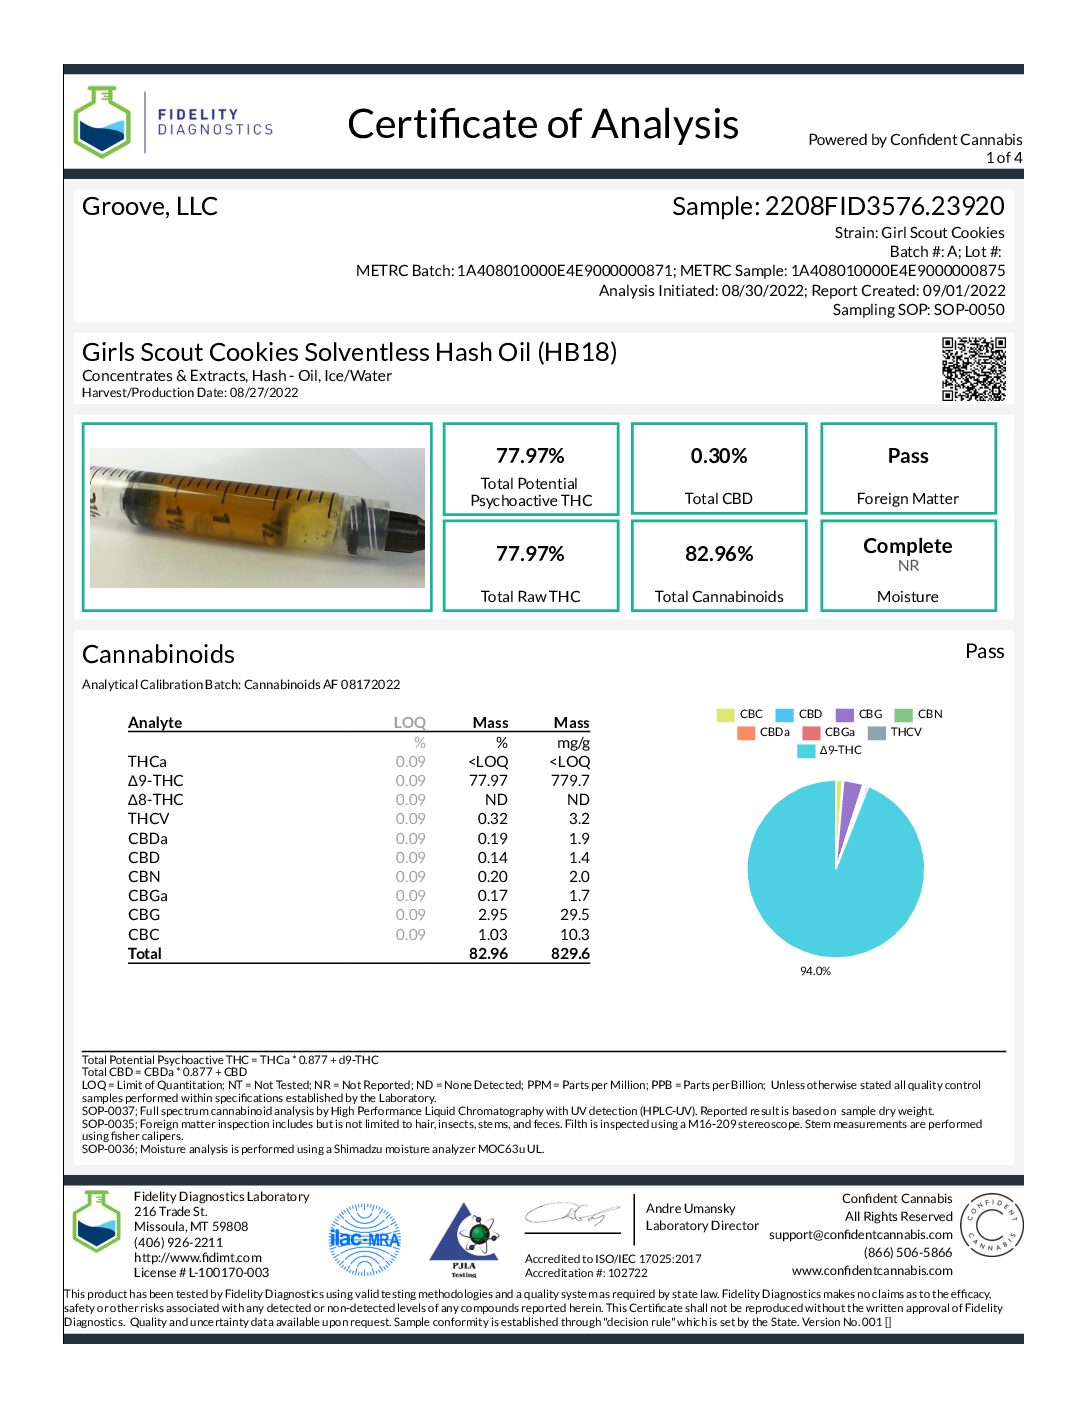 https://groovesolventless.com/wp-content/uploads/2022/09/Girls-Scout-Cookies-Solventless-Hash-Oil-HB18-pdf.jpg